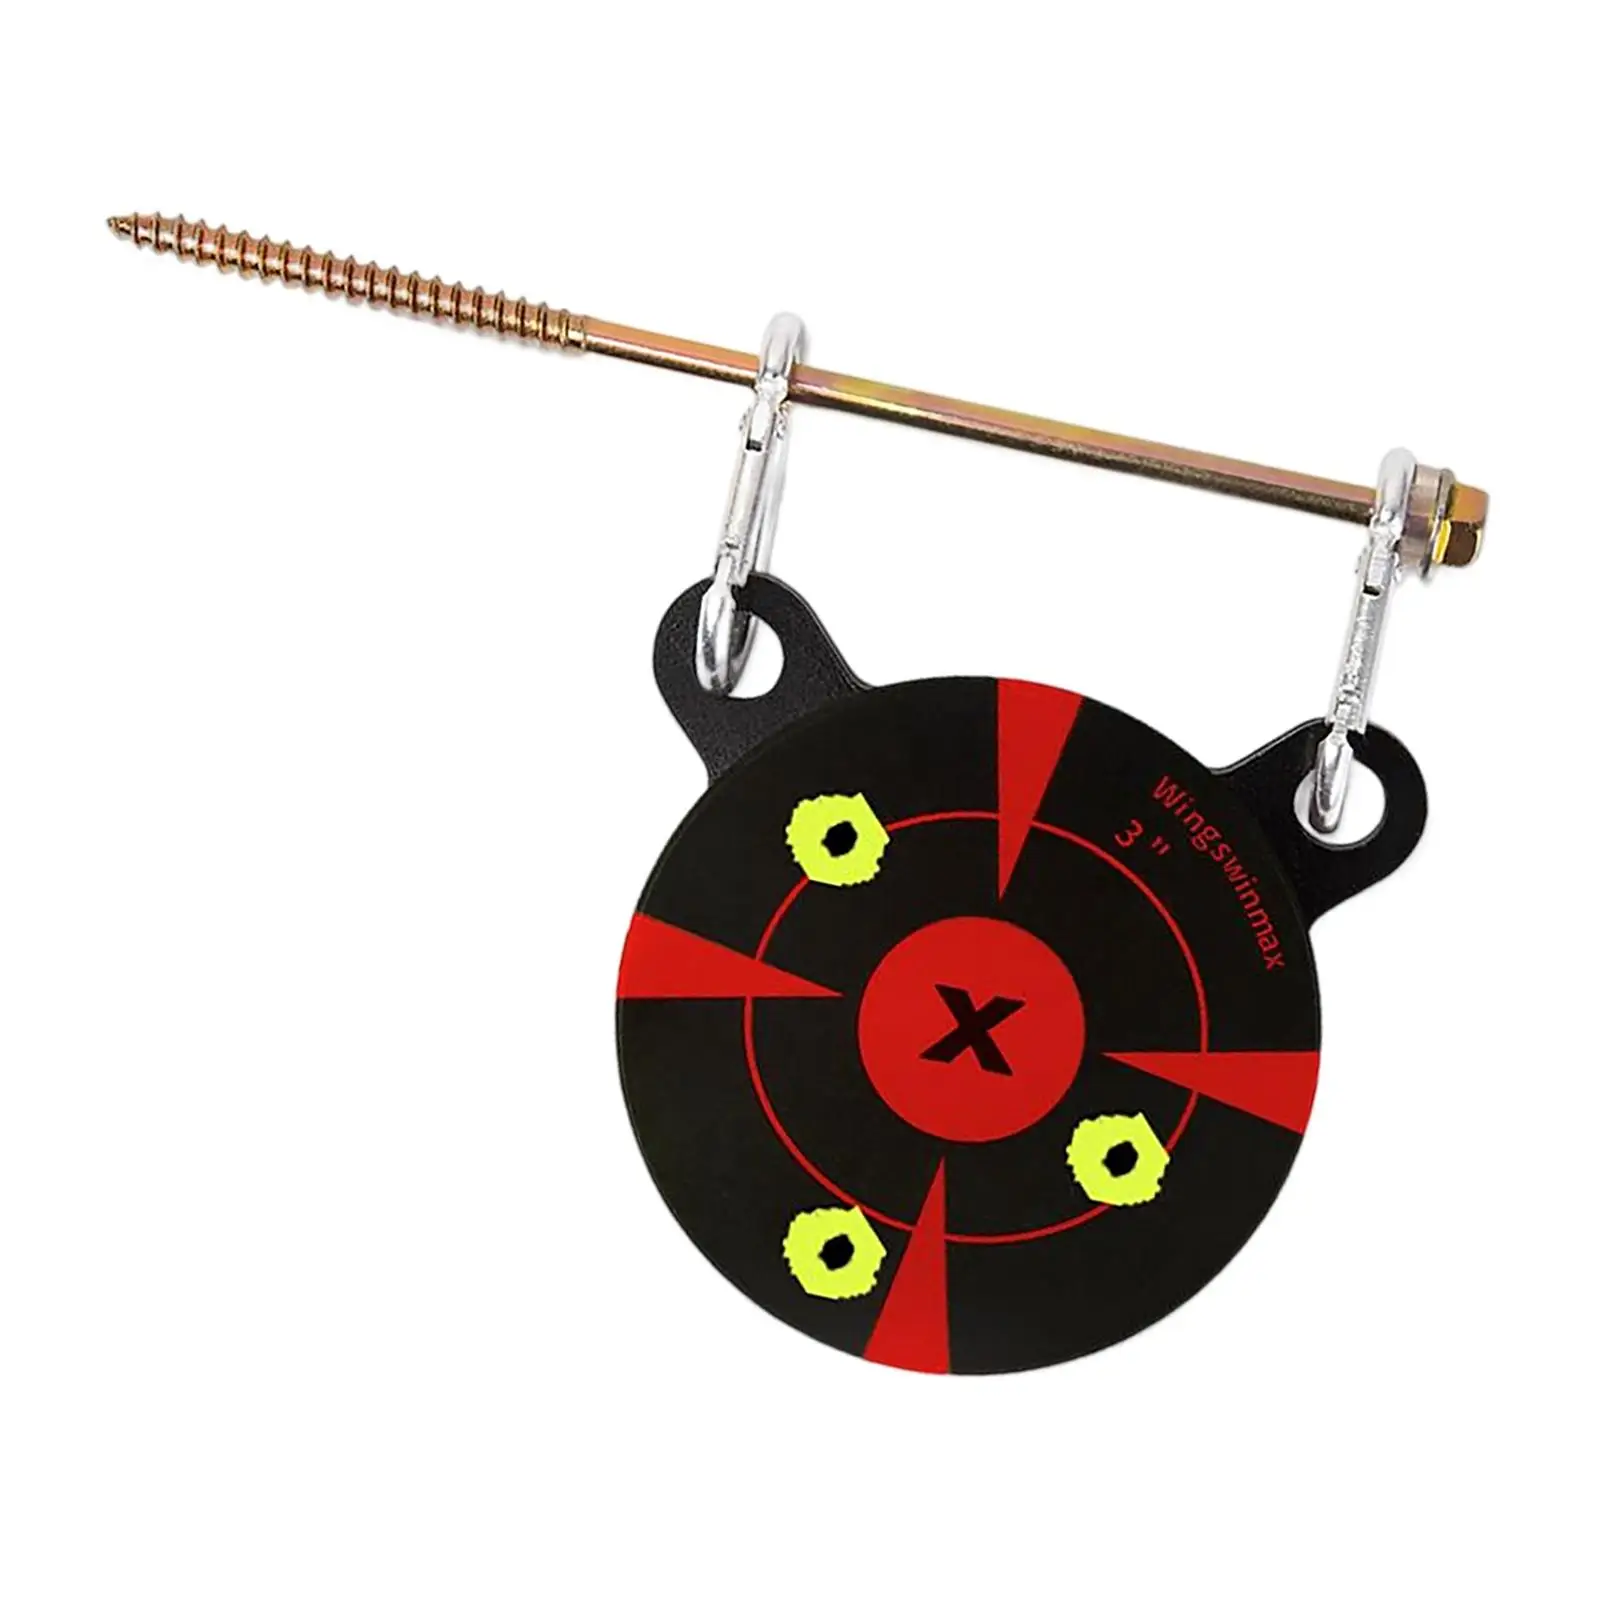  Thick Target, Outdoor Resistant with Hooks Double Hole Alloy Shot Practice Target for Professionals Training, Outdoor Sports